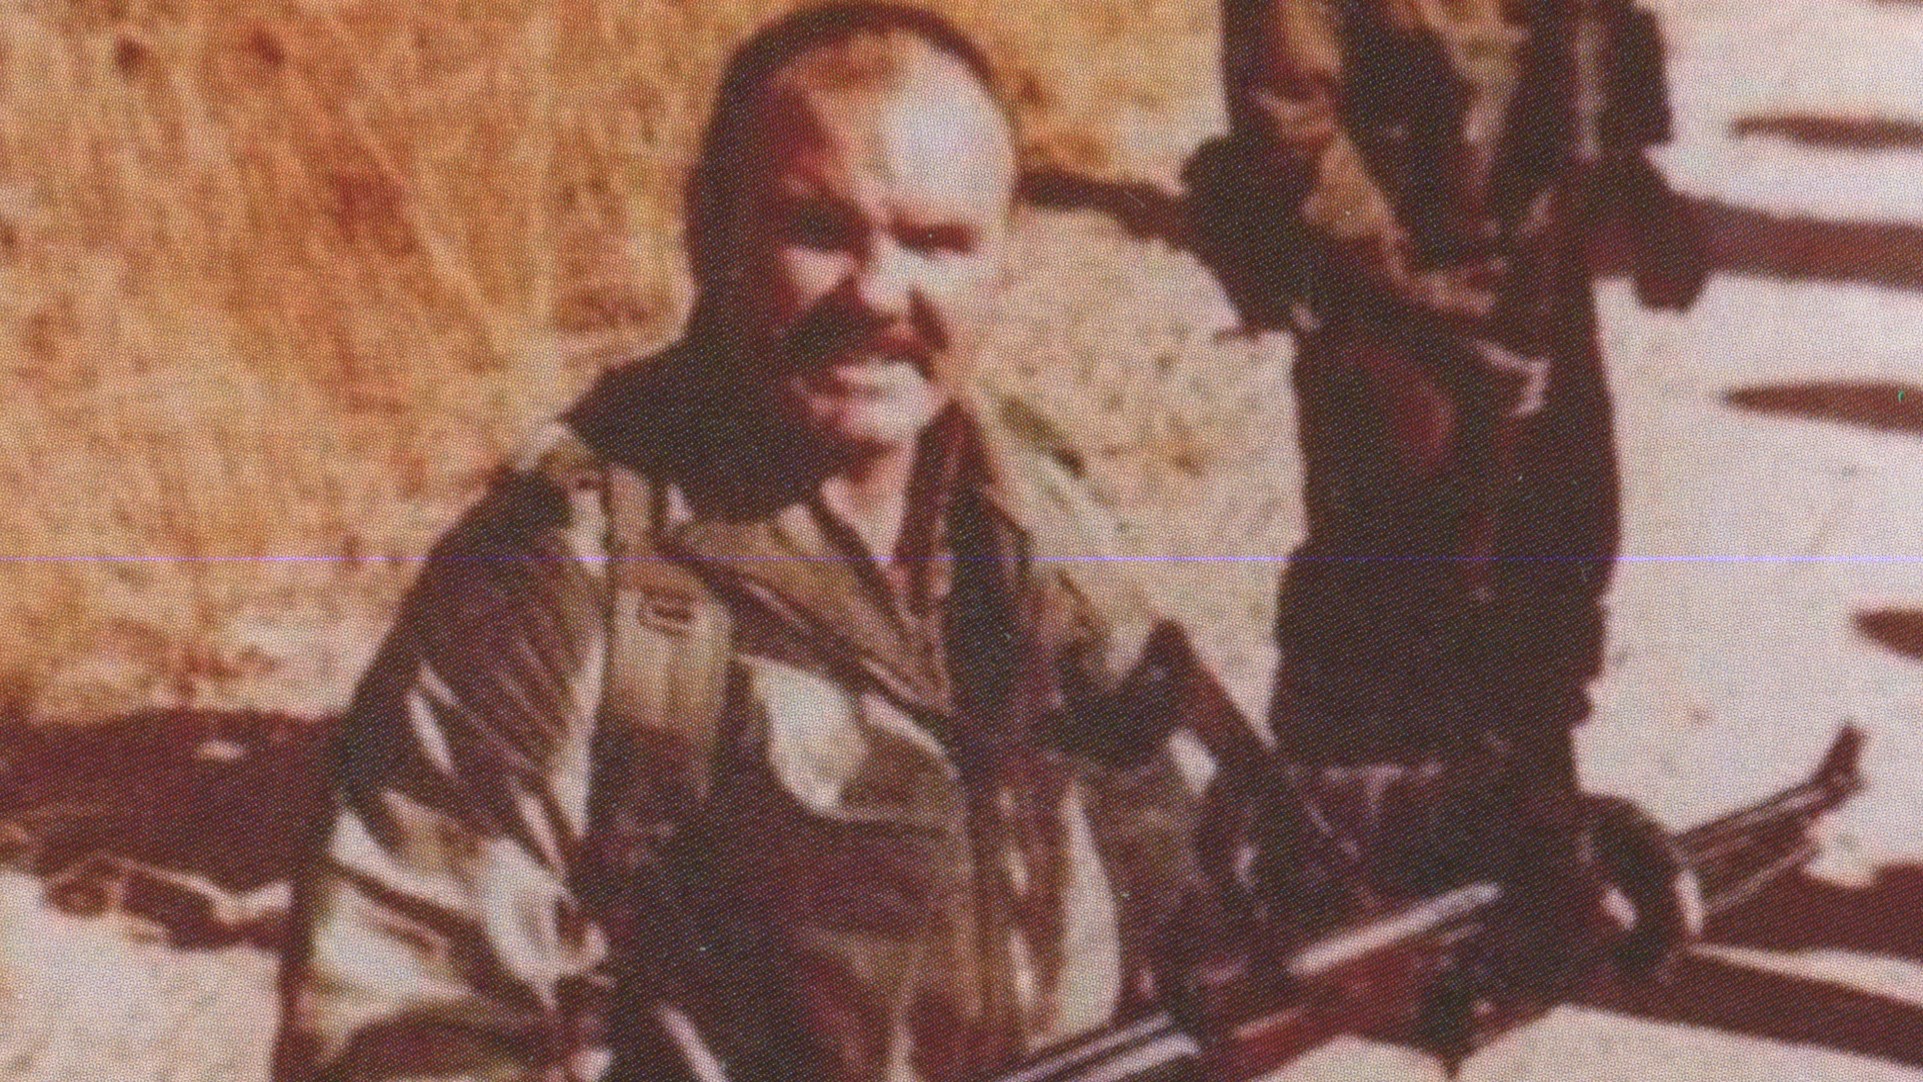 Peter McAleese was tactical commander of the heavily armed mission to kill the Colombian druglord Pablo Escobar